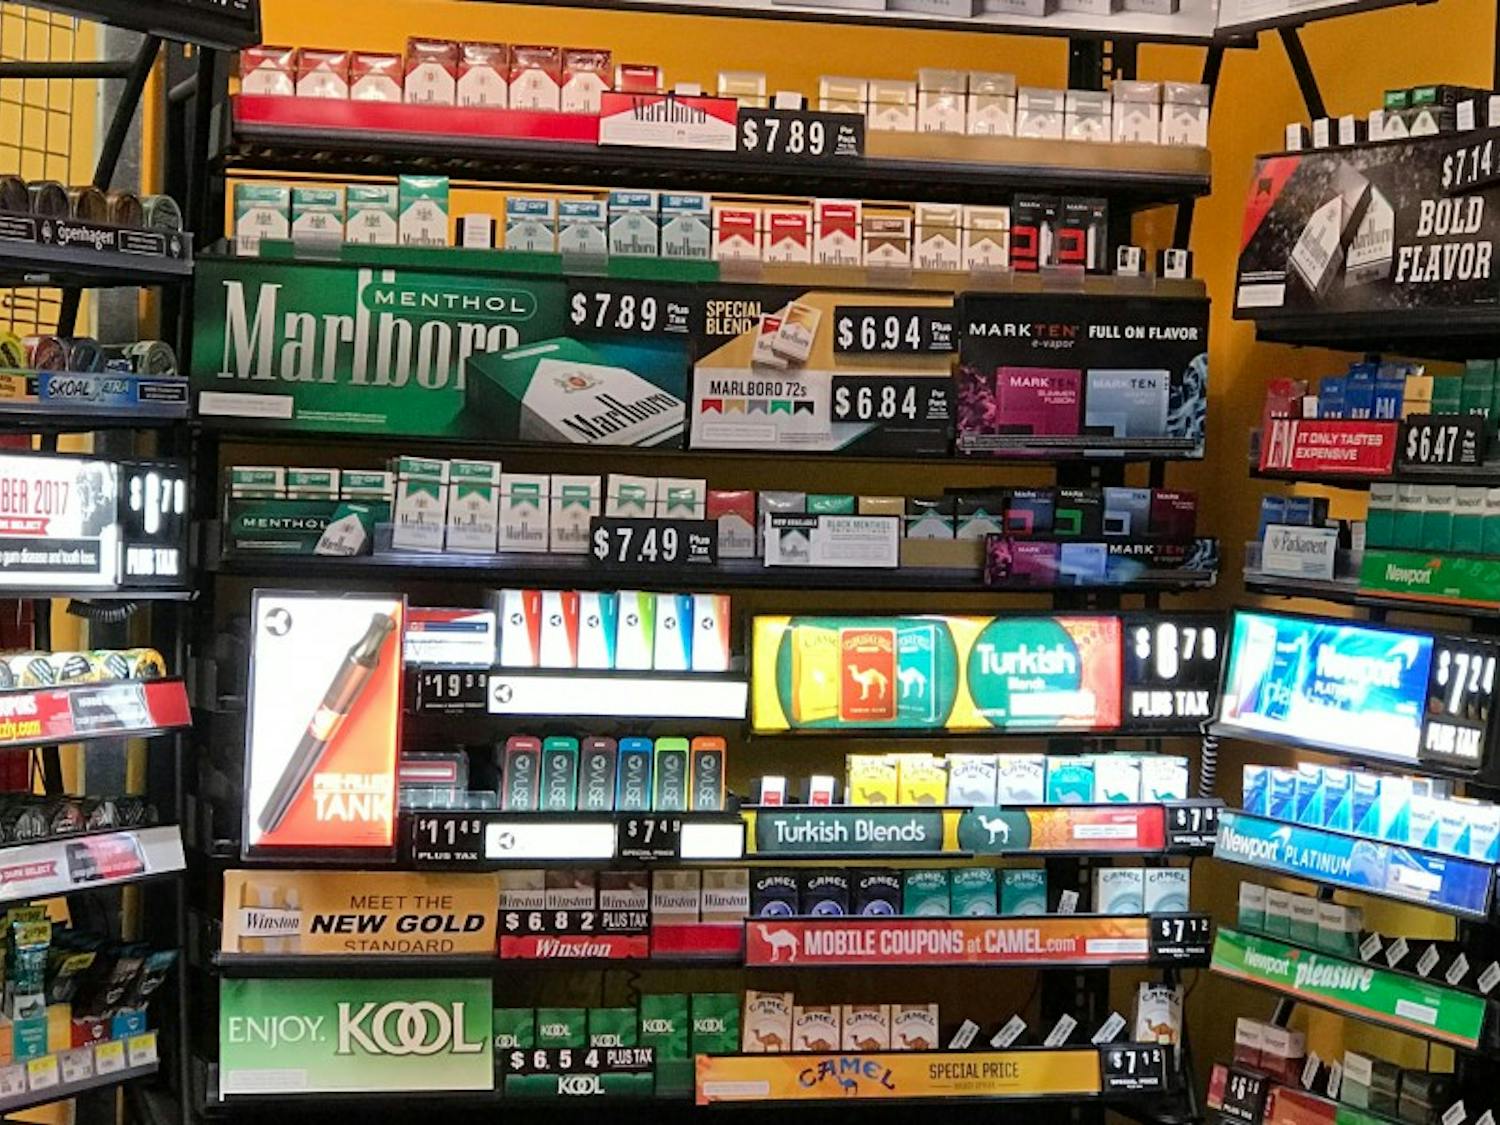 A bill introduced by state Sen. Shelia Harsdorf, R-River Falls, would move flavored tobacco and e-cigarettes behind the counter with other cigarettes in order to curb adolescent smoking.